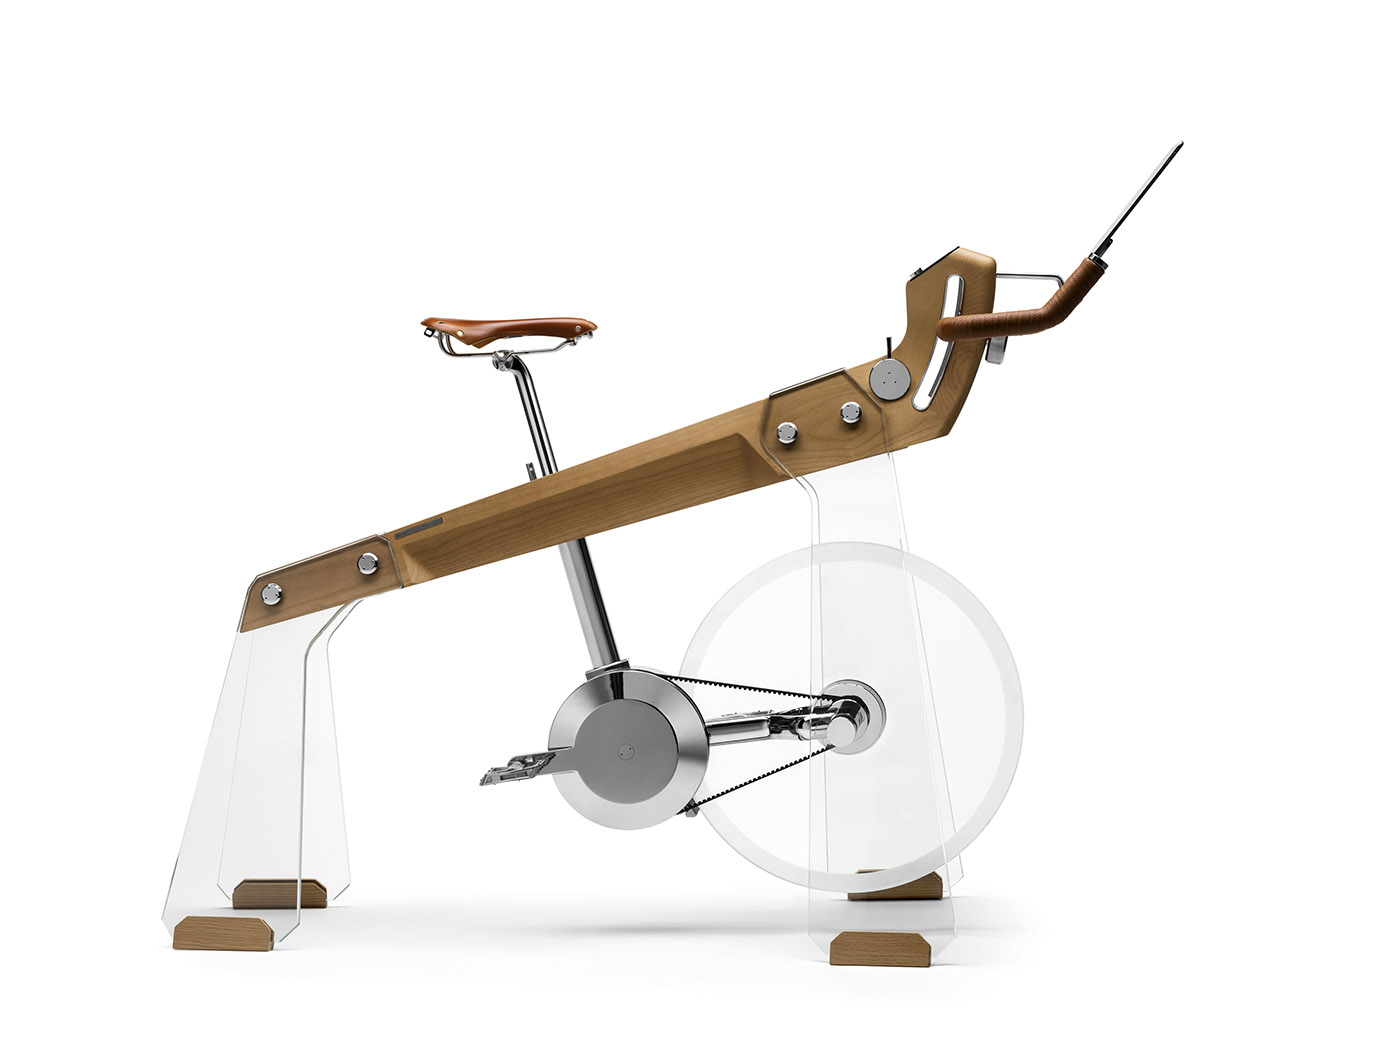 Home Wellness and Design. The bicycle without wheels turns into a furnishing object